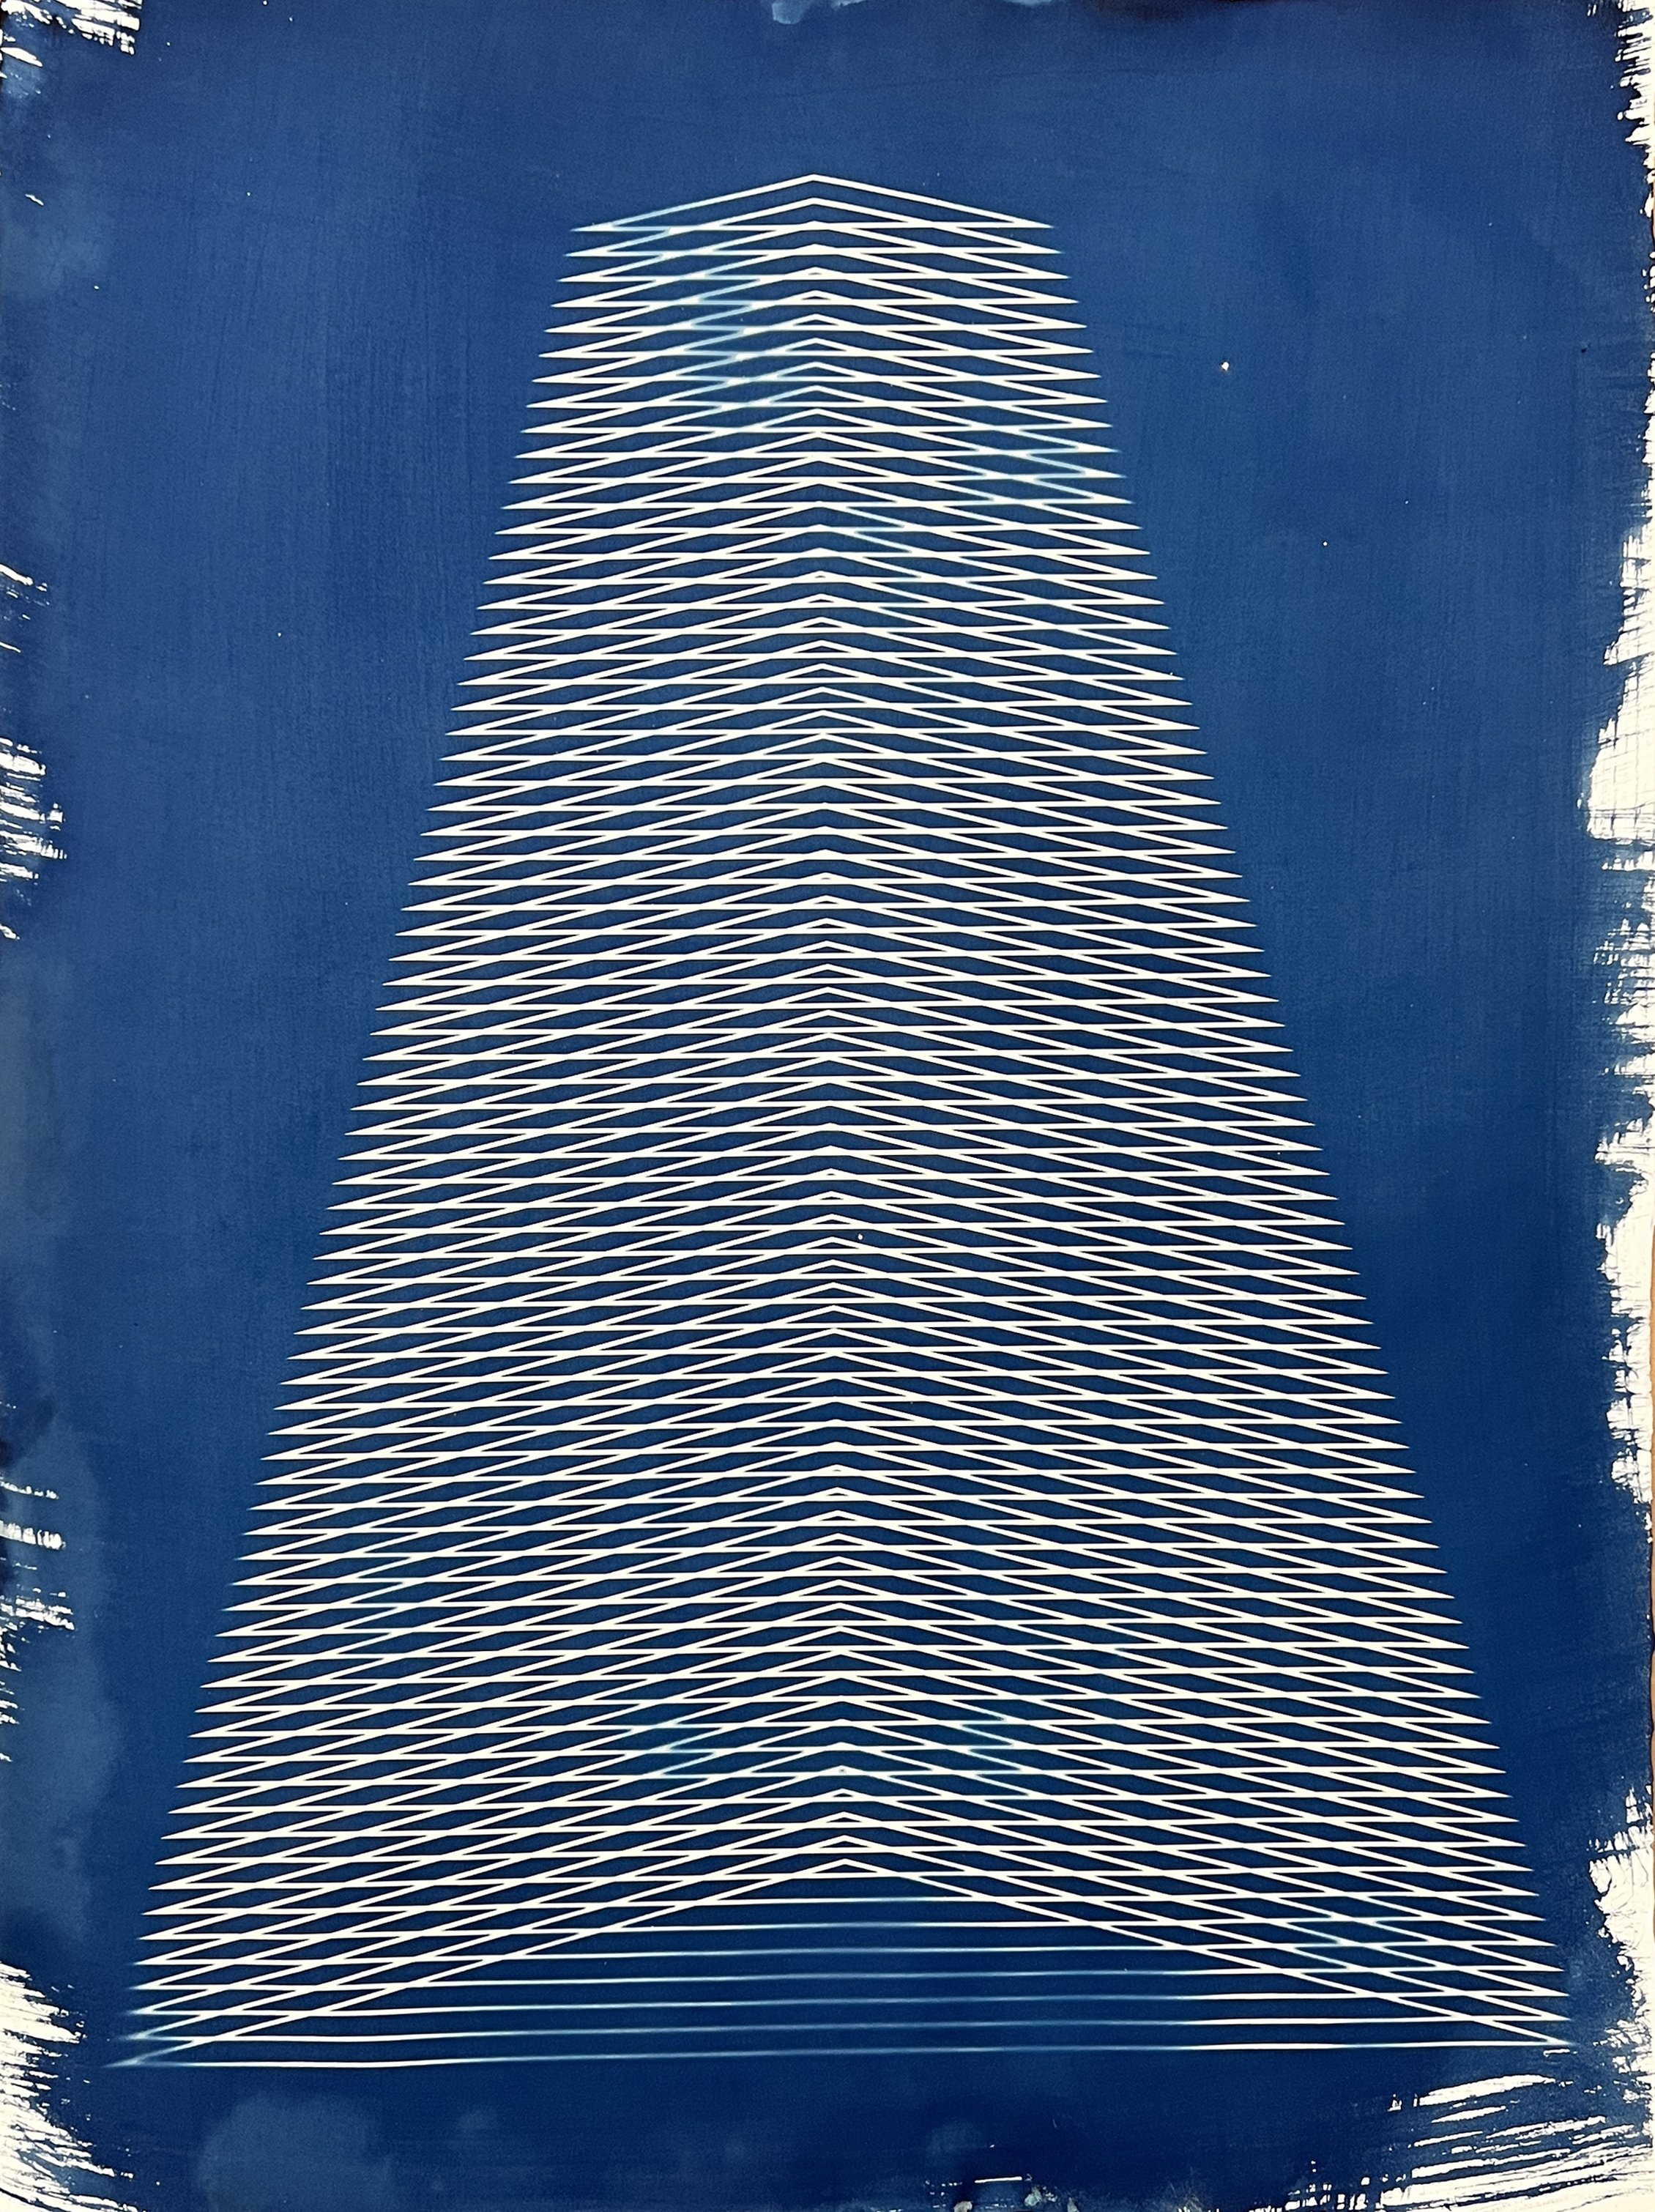    Untitled,   (from series Meditations on Perceived Acts of Violence), 2022  Cyanotype on watercolor paper  30 x 22.50 in 